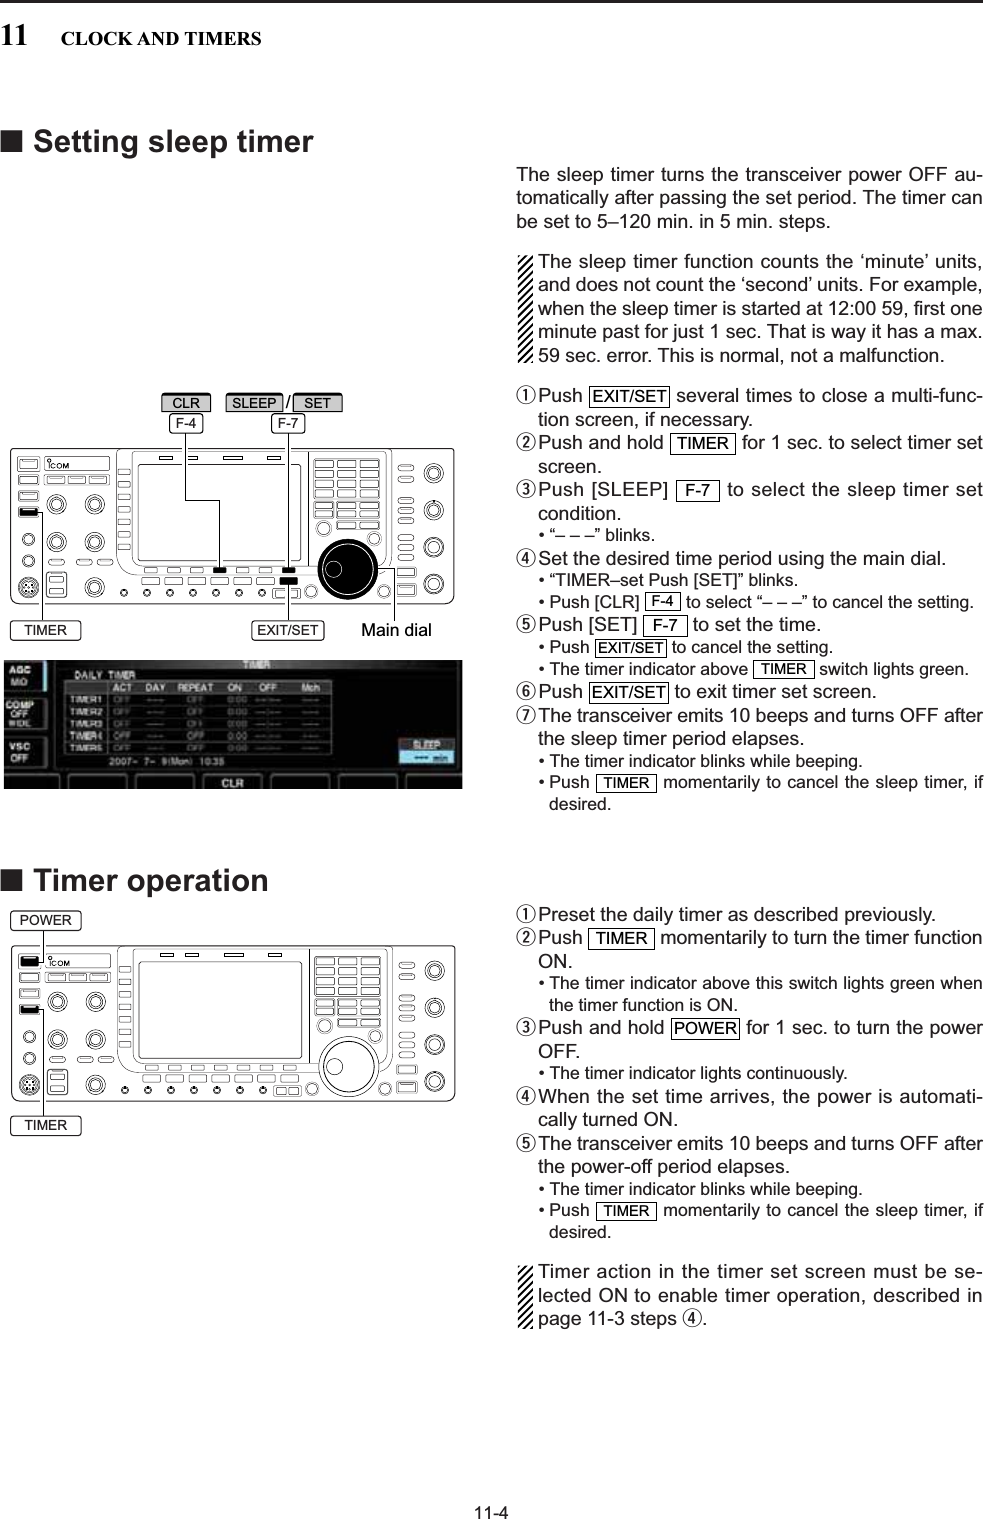 11-4■Setting sleep timerThe sleep timer turns the transceiver power OFF au-tomatically after passing the set period. The timer canbe set to 5–120 min. in 5 min. steps.The sleep timer function counts the ‘minute’ units,and does not count the ‘second’ units. For example,when the sleep timer is started at 12:00 59, first oneminute past for just 1 sec. That is way it has a max.59 sec. error. This is normal, not a malfunction.qPush  several times to close a multi-func-tion screen, if necessary.wPush and hold  for 1 sec. to select timer setscreen.ePush [SLEEP]  to select the sleep timer setcondition.• “– – –” blinks.rSet the desired time period using the main dial.• “TIMER–set Push [SET]” blinks.• Push [CLR]  to select “– – –” to cancel the setting.tPush [SET]  to set the time.• Push  to cancel the setting.• The timer indicator above  switch lights green.yPush  to exit timer set screen.uThe transceiver emits 10 beeps and turns OFF afterthe sleep timer period elapses.• The timer indicator blinks while beeping.• Push  momentarily to cancel the sleep timer, ifdesired.■Timer operationqPreset the daily timer as described previously.wPush  momentarily to turn the timer functionON.• The timer indicator above this switch lights green whenthe timer function is ON.ePush and hold  for 1 sec. to turn the powerOFF.• The timer indicator lights continuously.rWhen the set time arrives, the power is automati-cally turned ON.tThe transceiver emits 10 beeps and turns OFF afterthe power-off period elapses.• The timer indicator blinks while beeping.• Push  momentarily to cancel the sleep timer, ifdesired.Timer action in the timer set screen must be se-lected ON to enable timer operation, described inpage 11-3 steps r.TIMERPOWERTIMERTIMEREXIT/SETTIMEREXIT/SETF-7F-4F-7TIMEREXIT/SETMain dialSLEEPEXIT/SET/F-4 F-7SETCLRTIMERPOWERTIMER11 CLOCK AND TIMERS